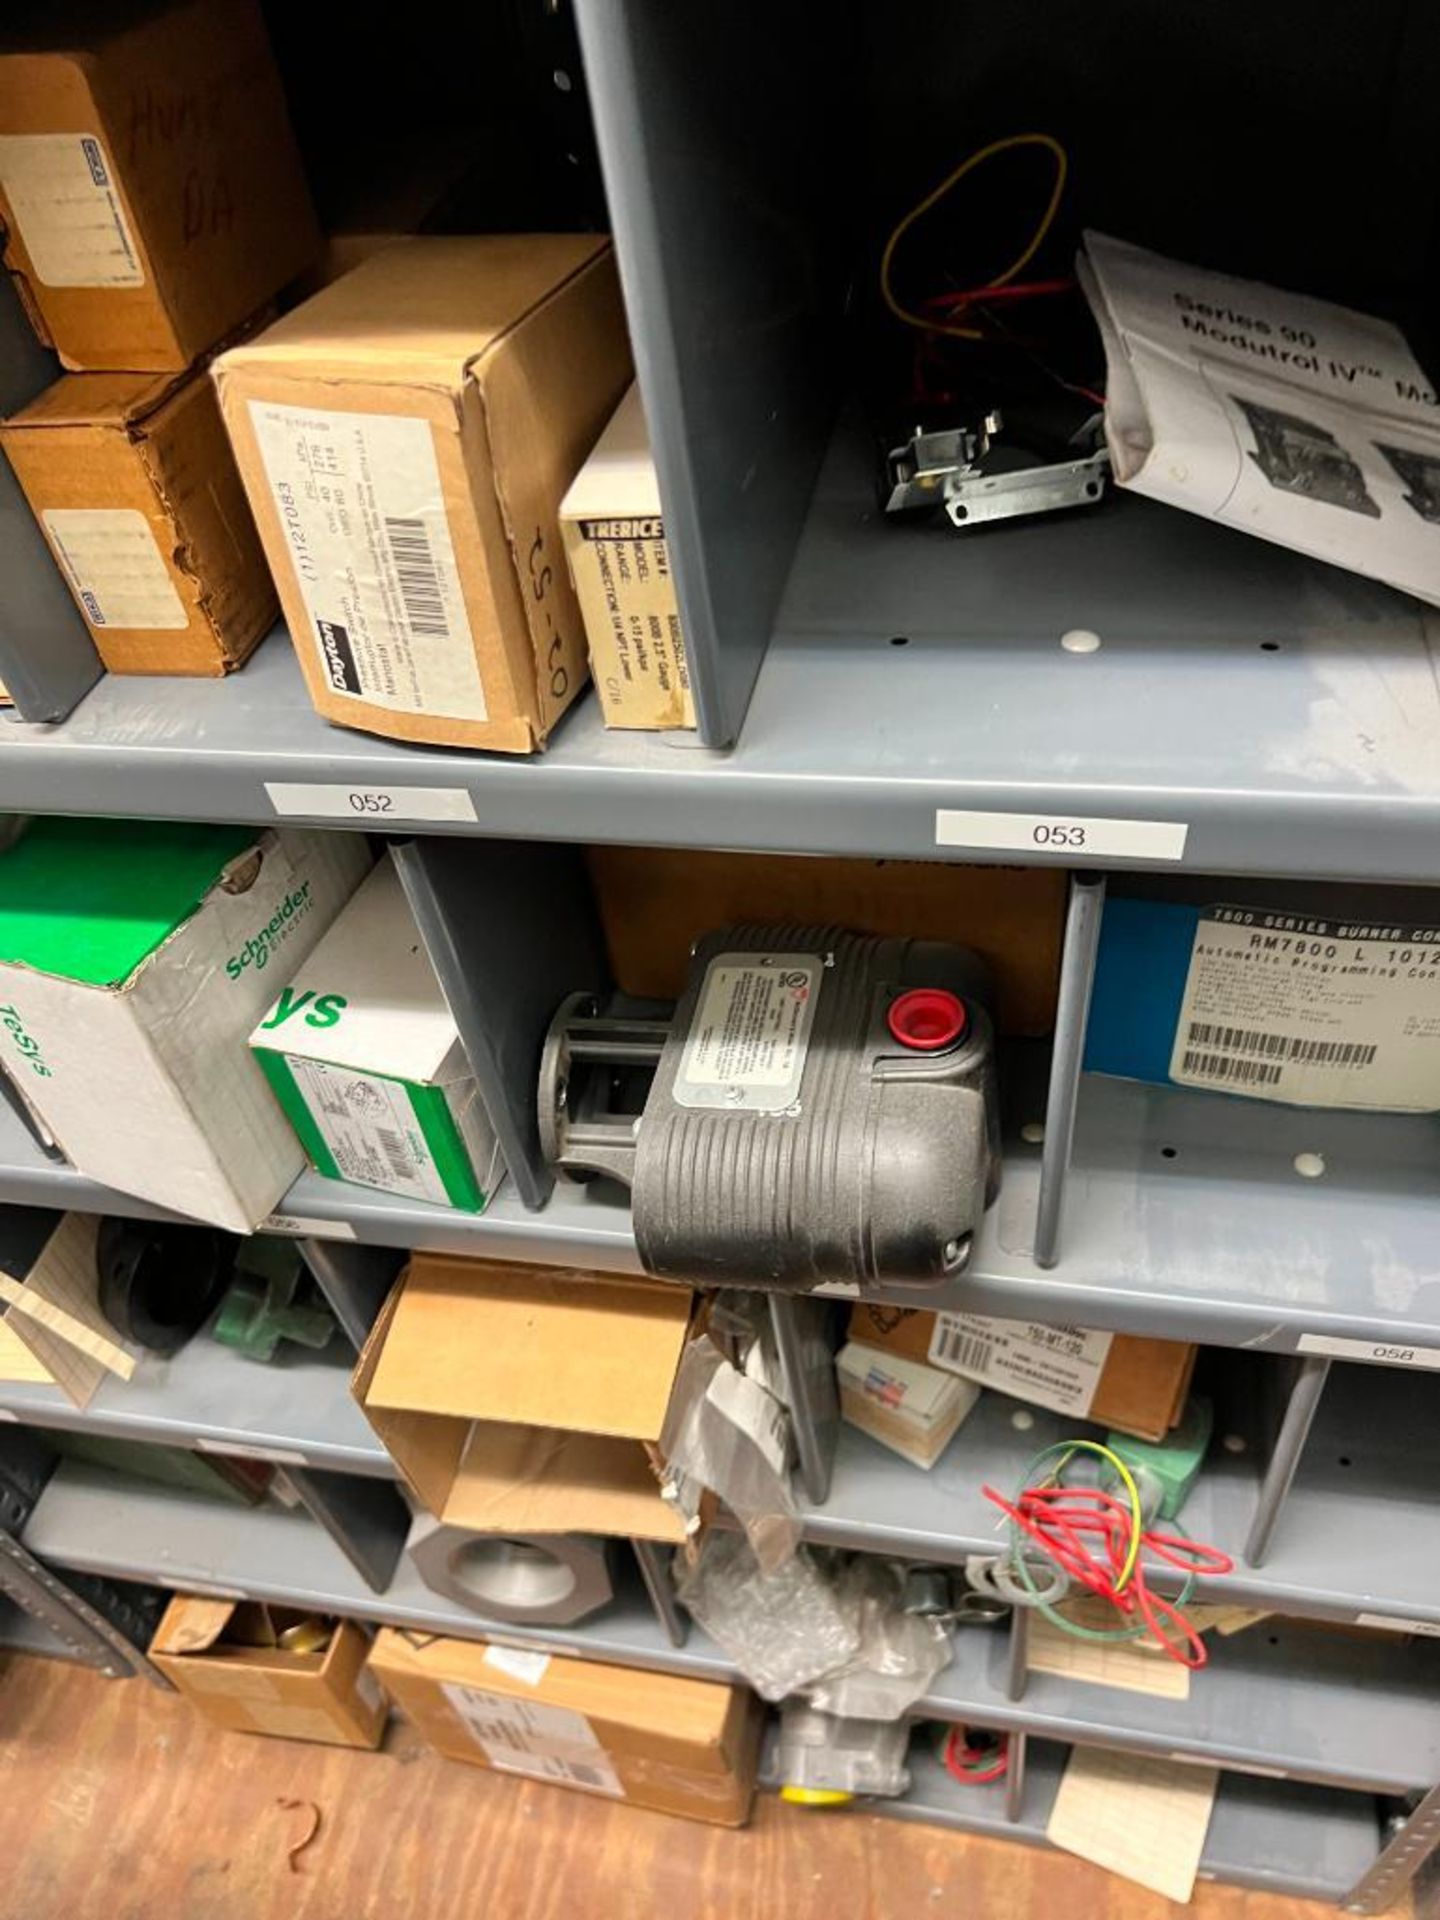 (28) Shelves of Assorted Parts, VERY LARGE LOT Consisting of MRO, Drives, Valves, PLC, Nuts, Bolts, - Image 50 of 67